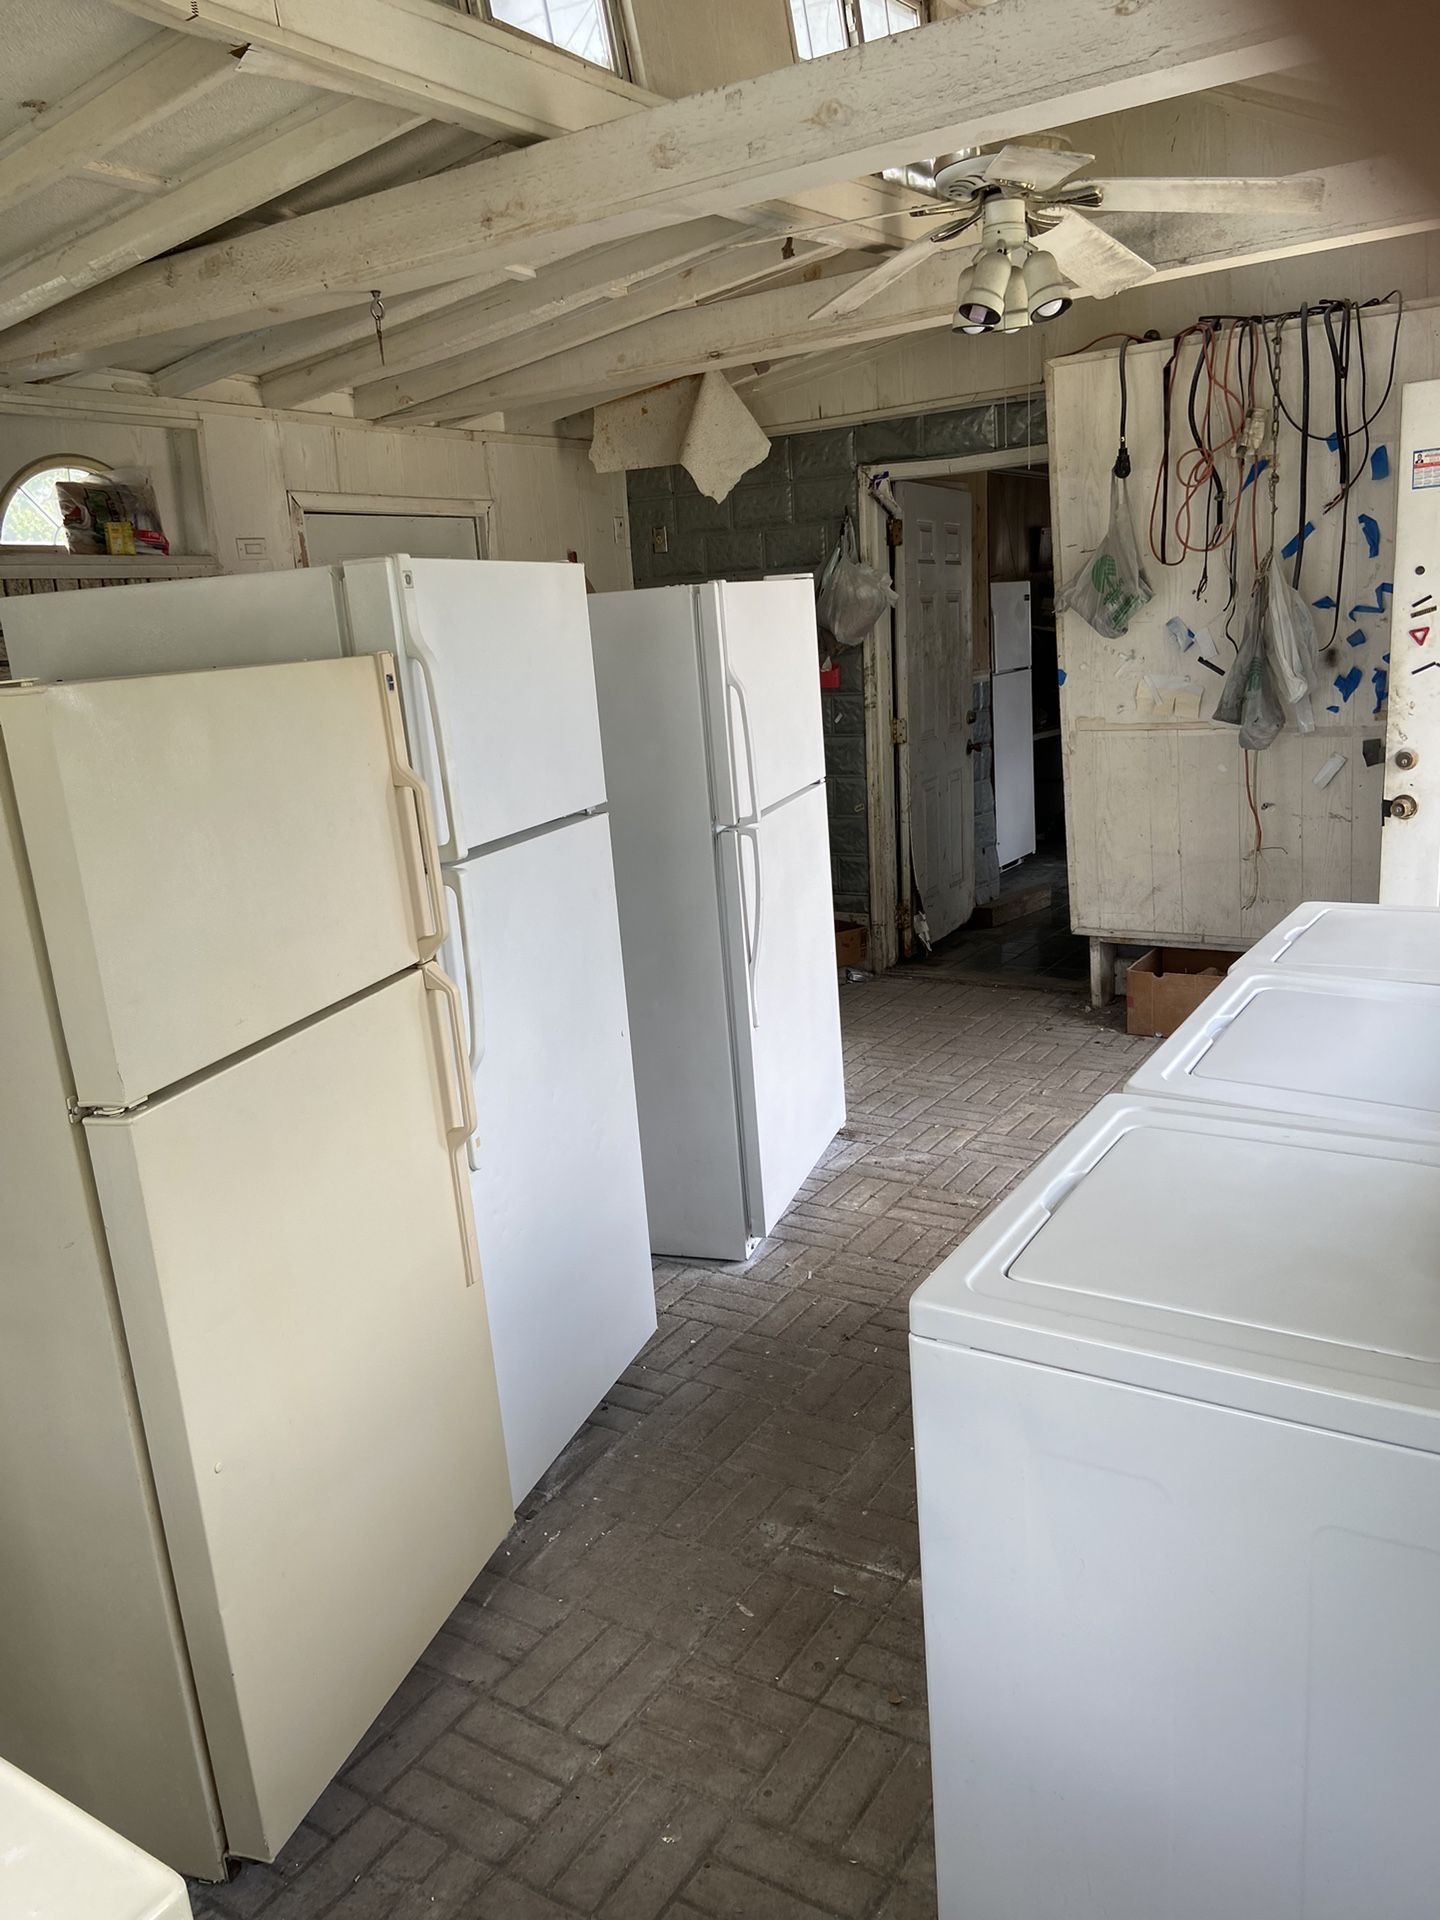 EXCELLENT RUNNNING FRIDGES , $275 START OUT PRICE. ALSO WASHERS SAME PRICE. ALL RUN LIKE BRAND NEW & BEEN CLEANED! ILL RUN THEM FOR YOU. IM IN MARRERO